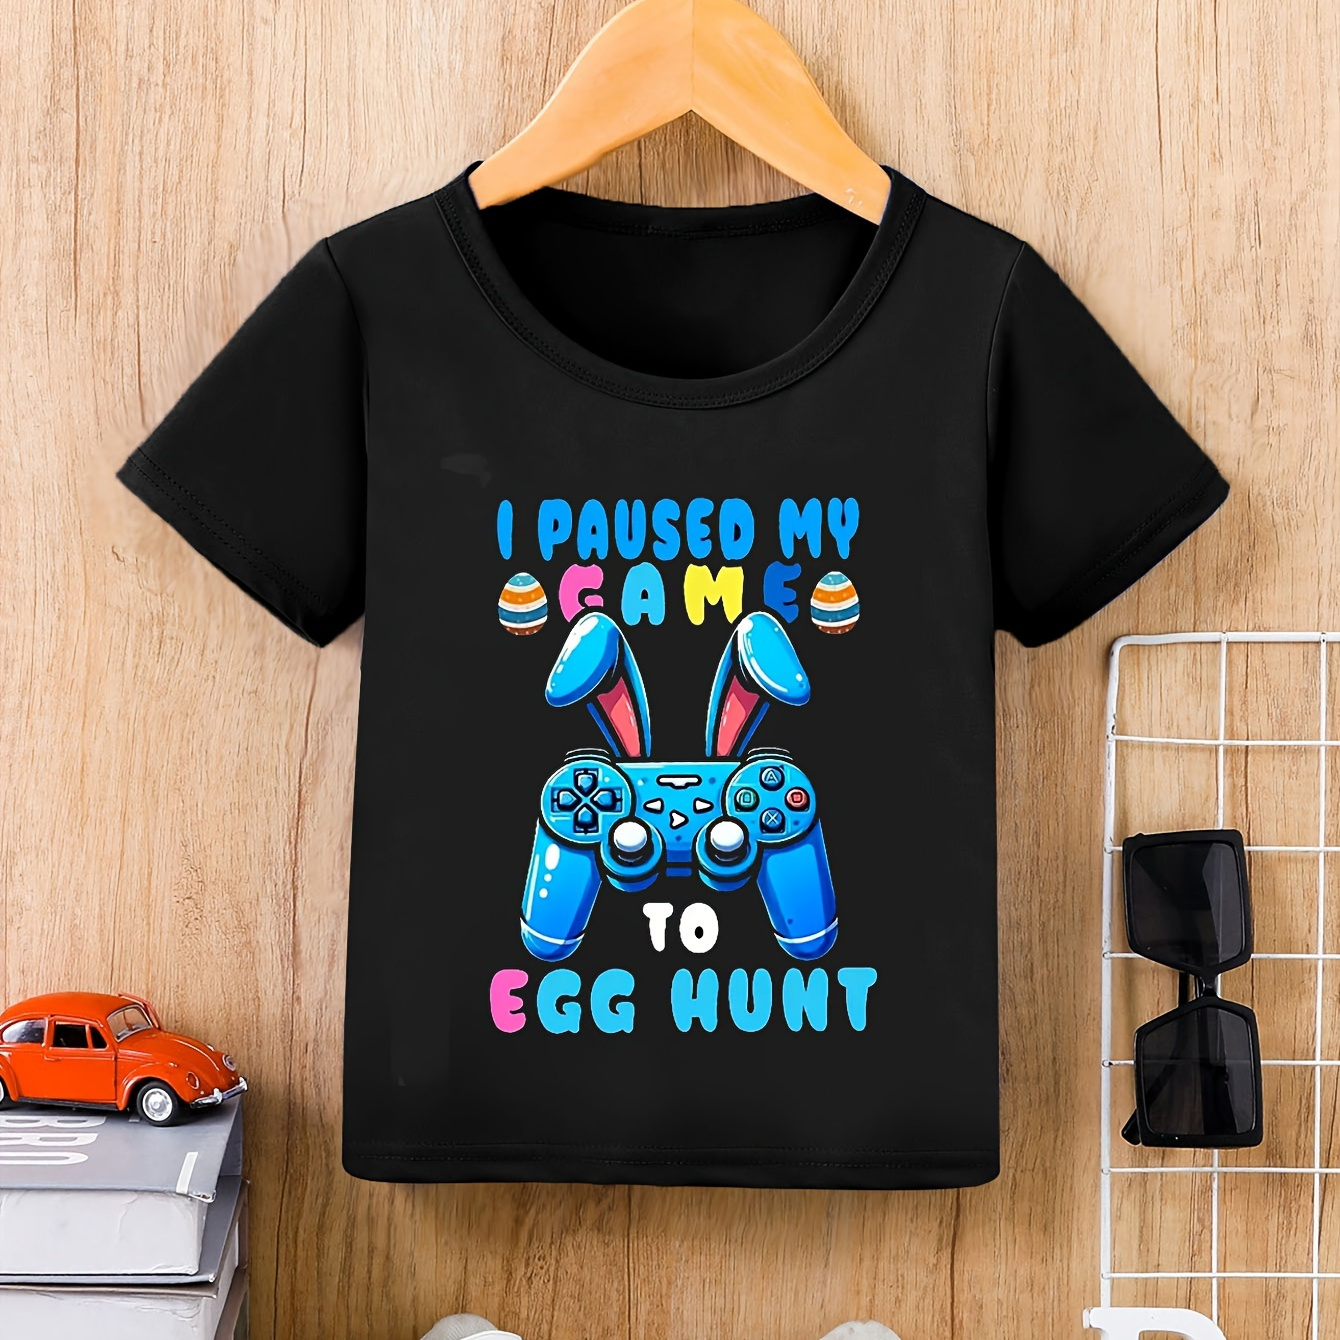 

I Paused My Game To Egg Hunt Letter Print Boys Comfortable Versatile Short Sleeve T-shirt Boys Tee Tops